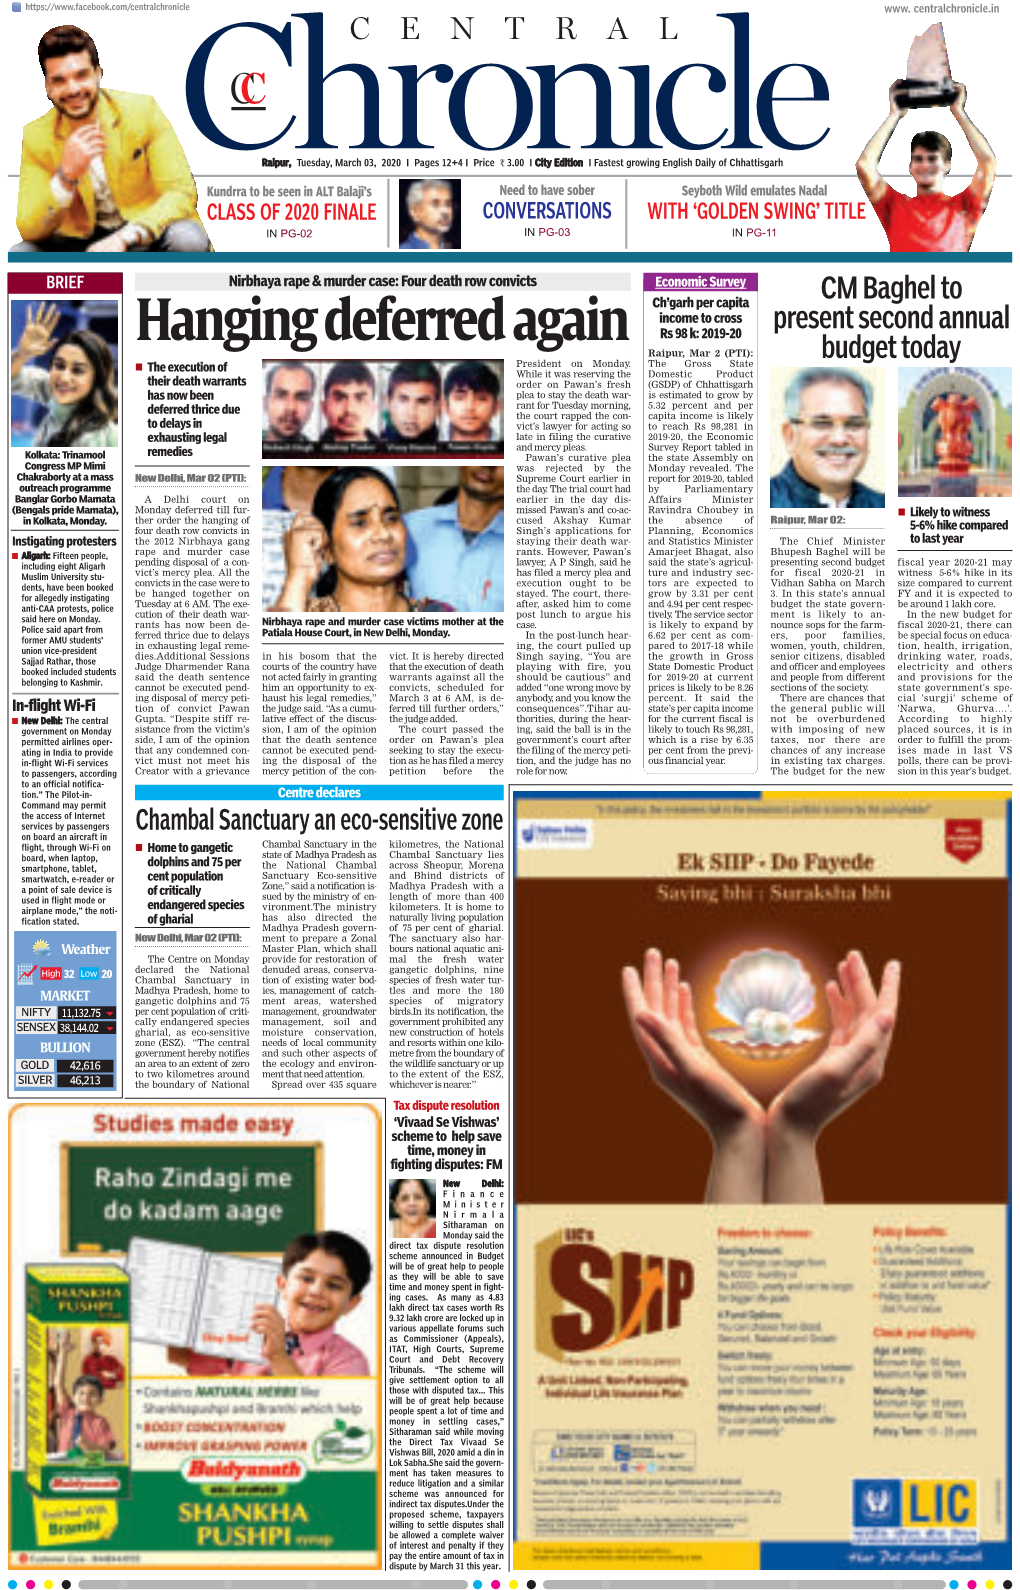 Hanging Deferred Again Rs 98 K: 2019-20 Raipur, Mar 2 (PTI): Budget Today  the Execution of President on Monday